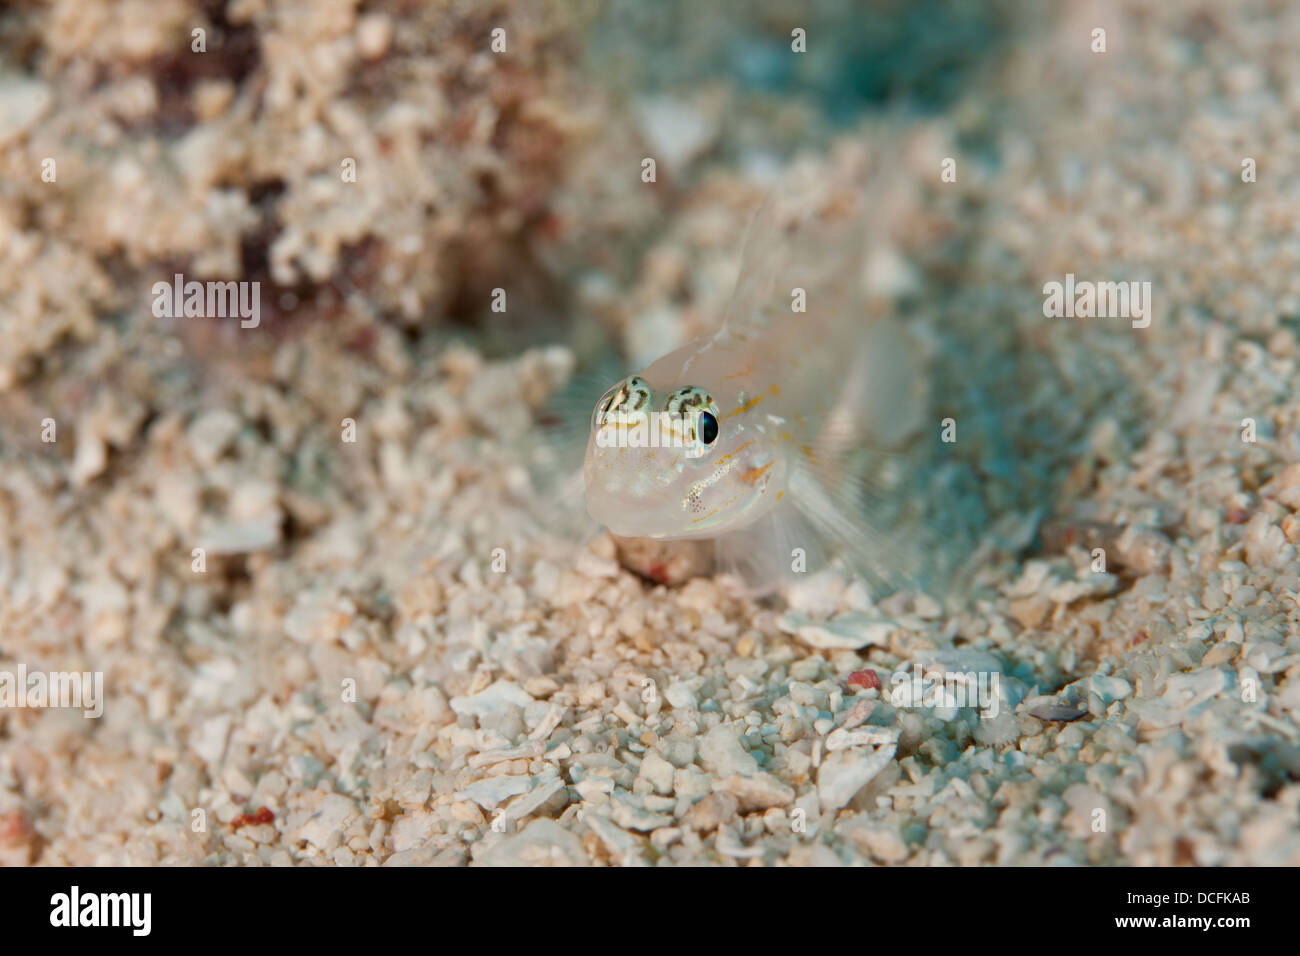 Bridled Goby (Coryphopterus glaucofraenum) on a tropical coral reef off the island of Roatan, Honduras. Stock Photo